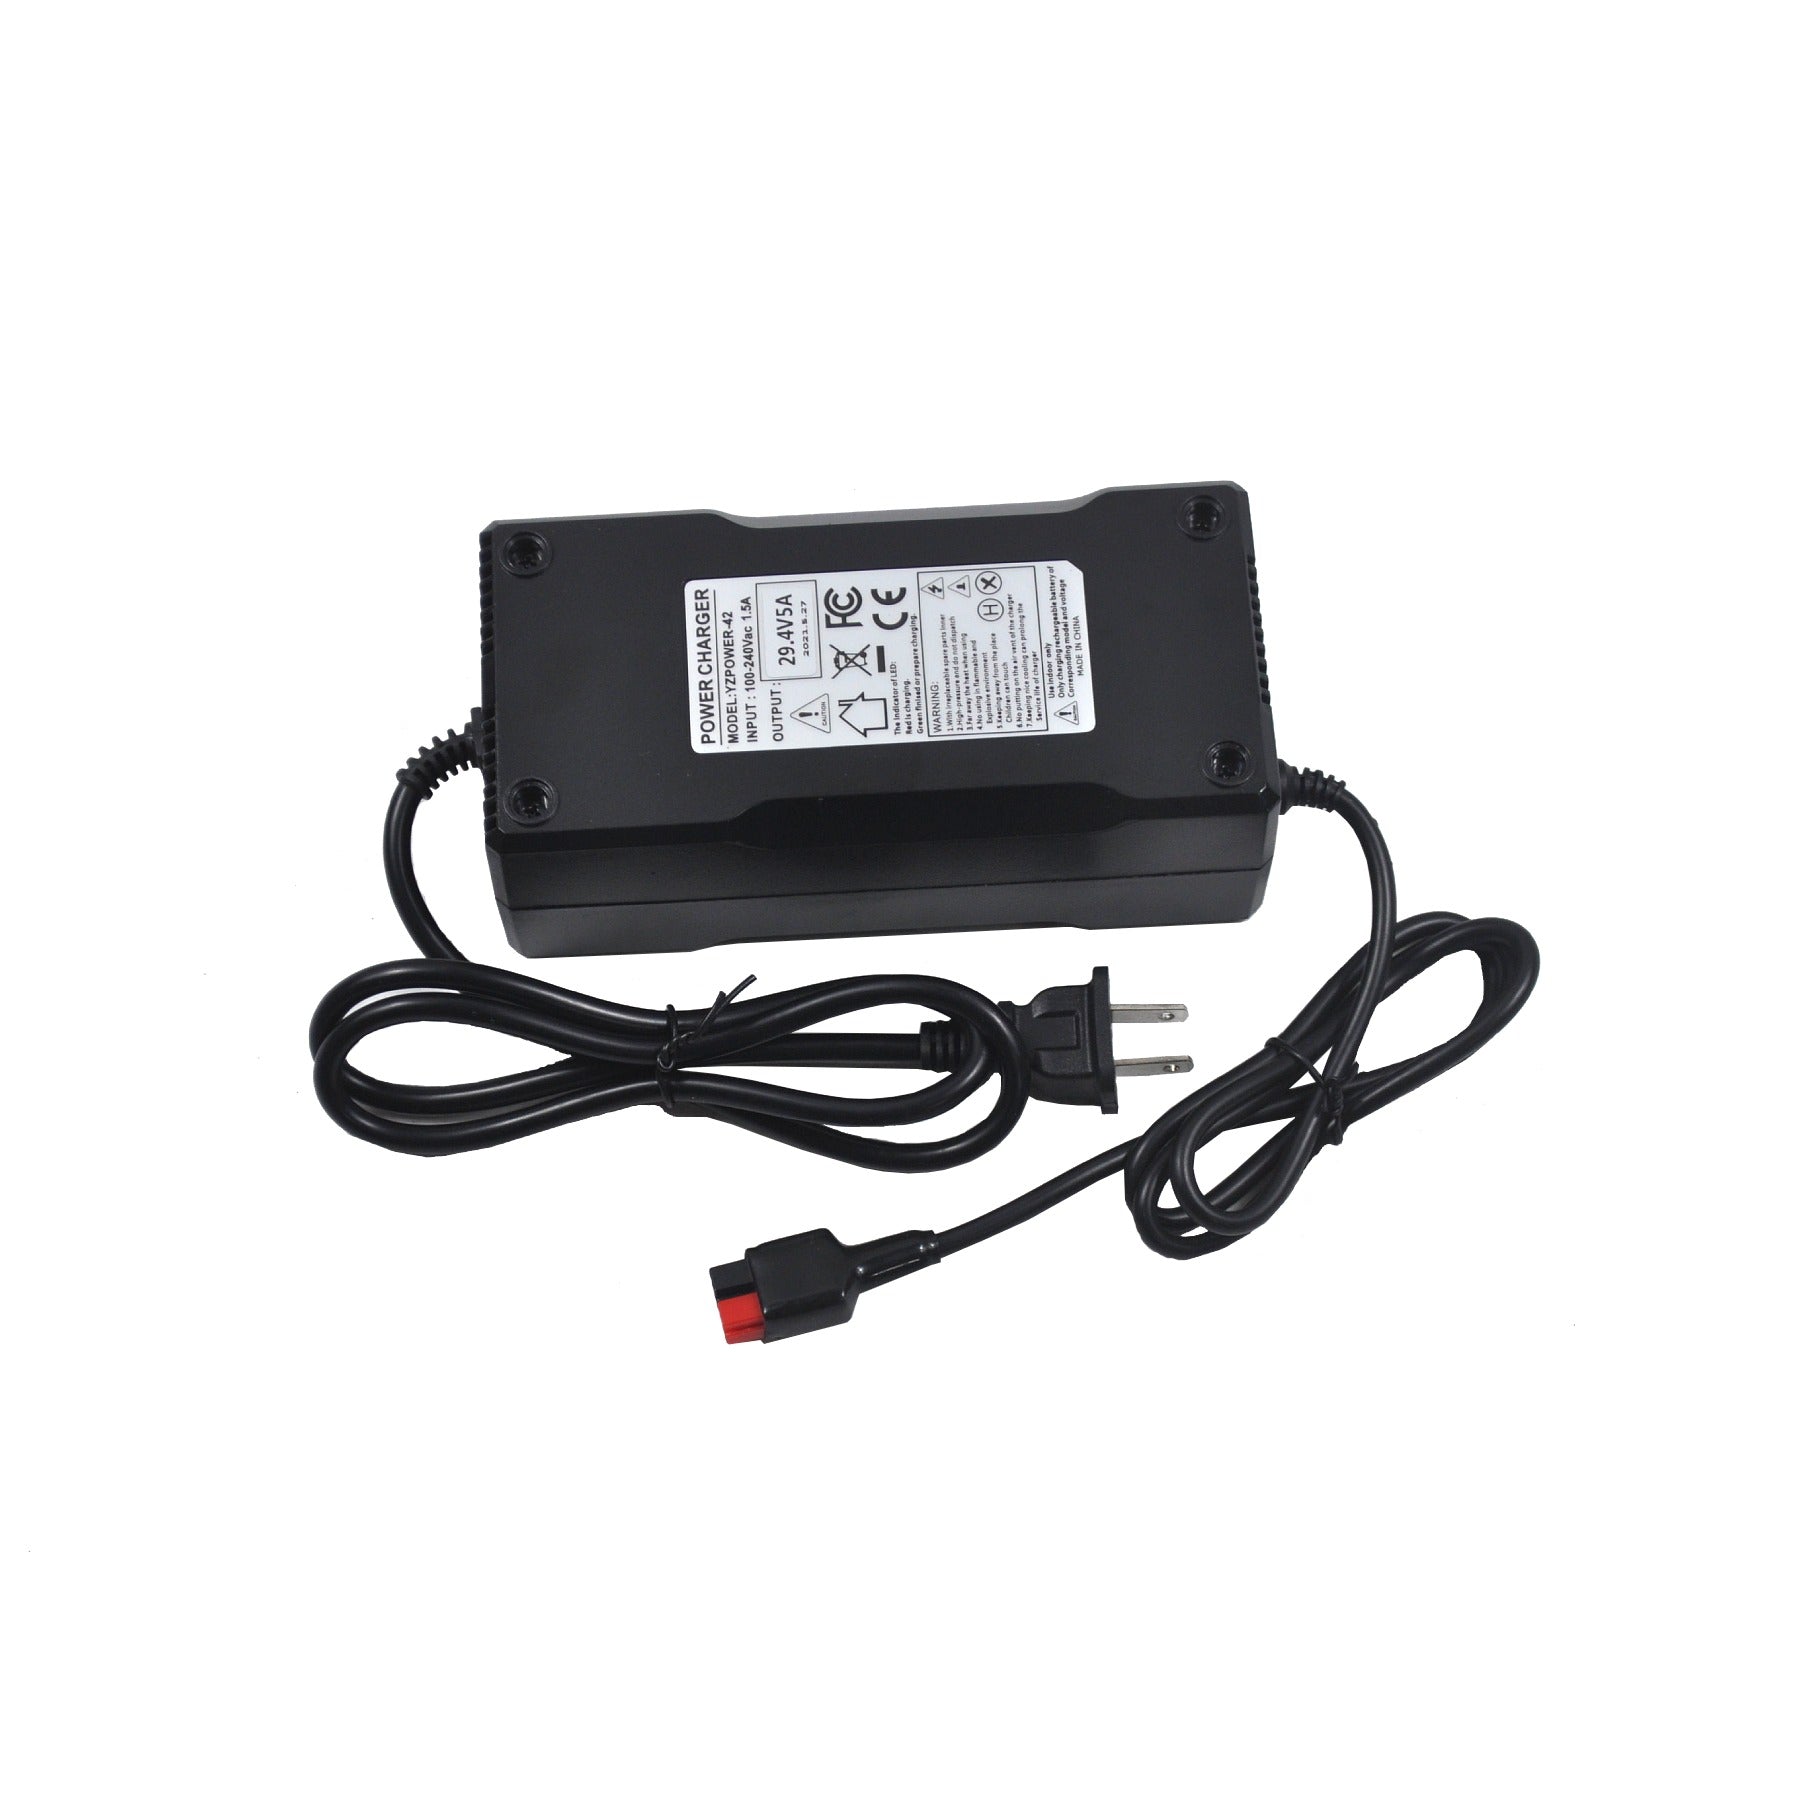 24V 5A NMC Lithium Ion Battery Charger